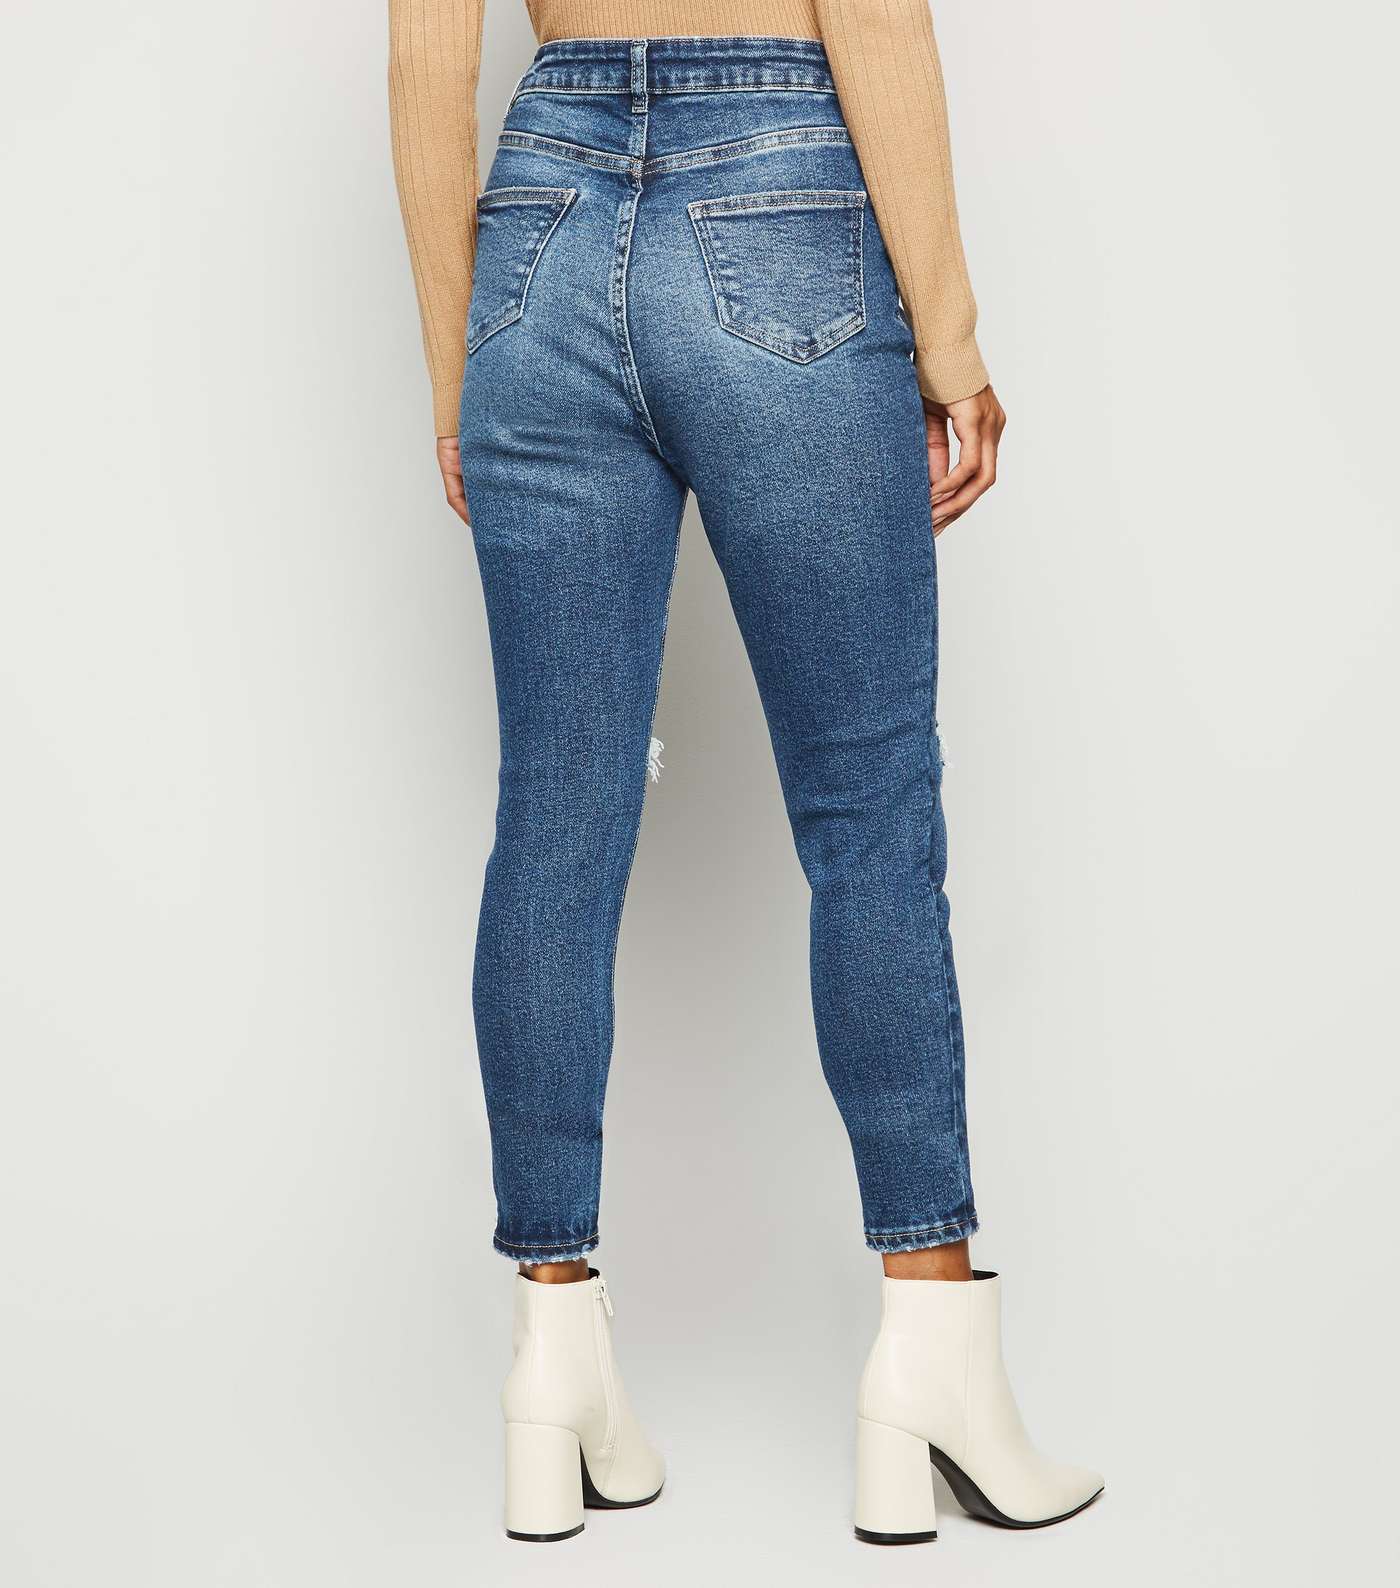 Petite Blue Rinse Wash Ripped High Waist Super Skinny Jeans Image 5